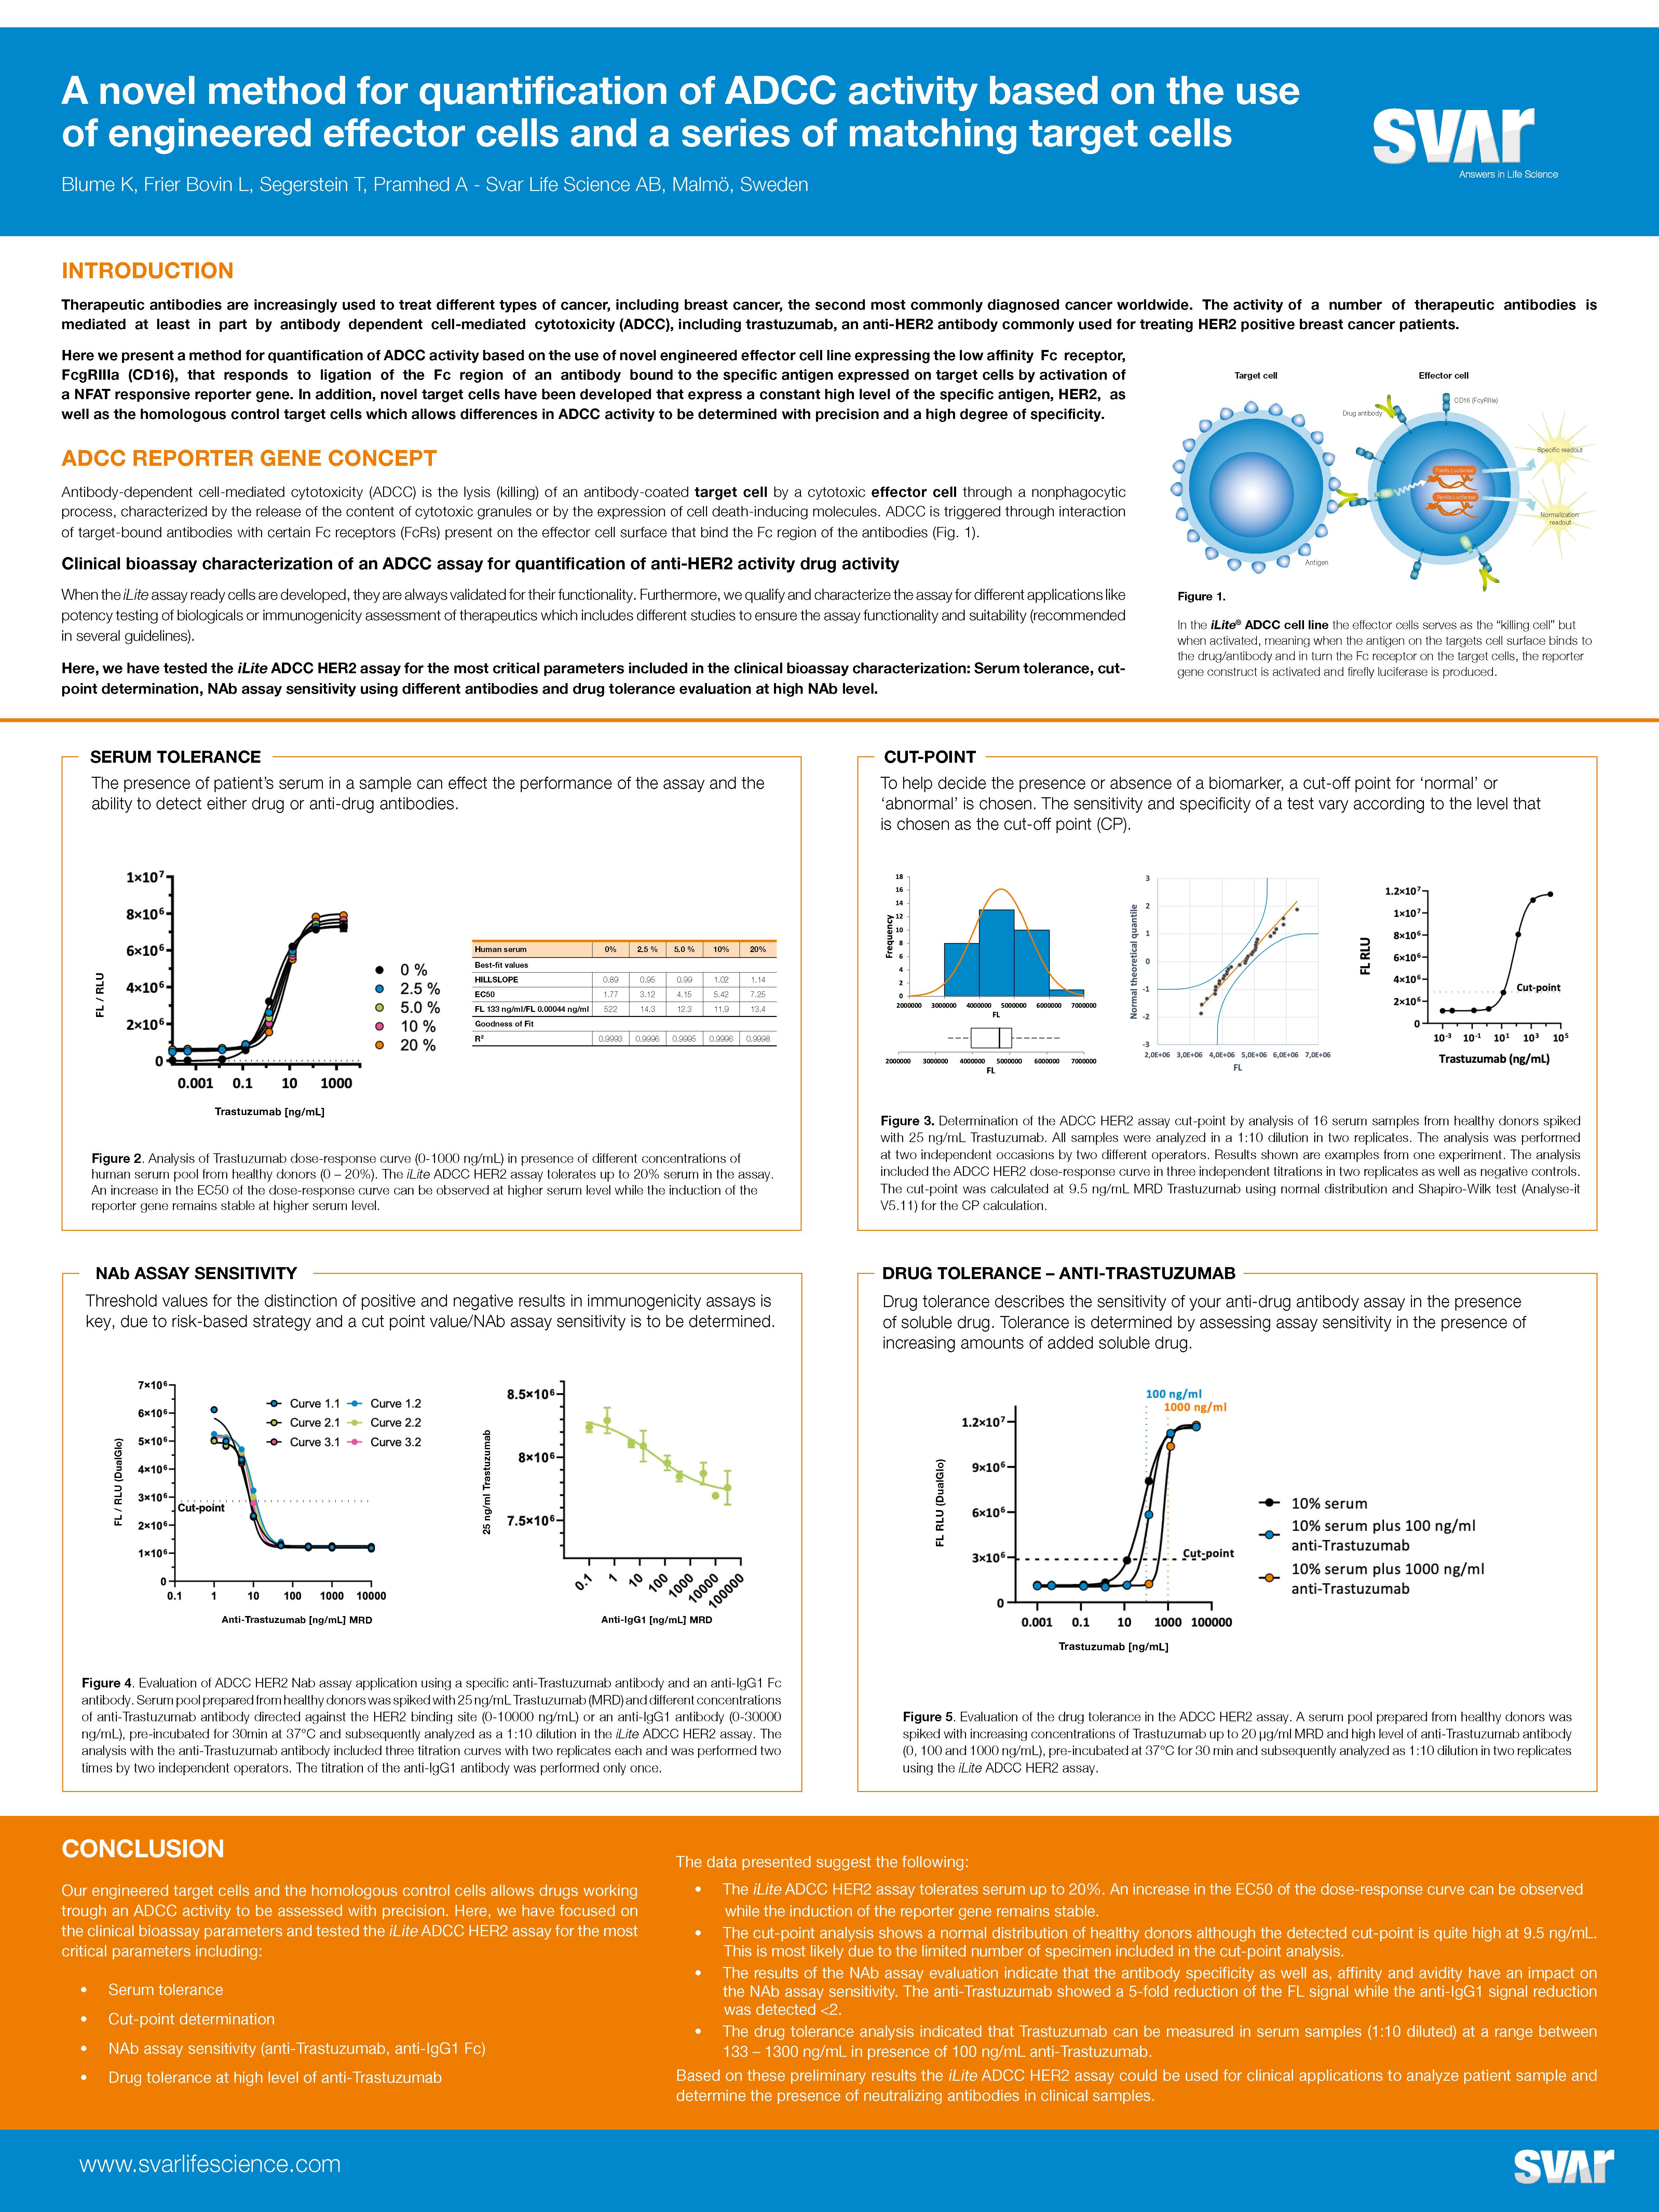 Scientific Poster: A novel method for quantification of ADCC activity based on the use of engineered effector cells and a series of matching target cells